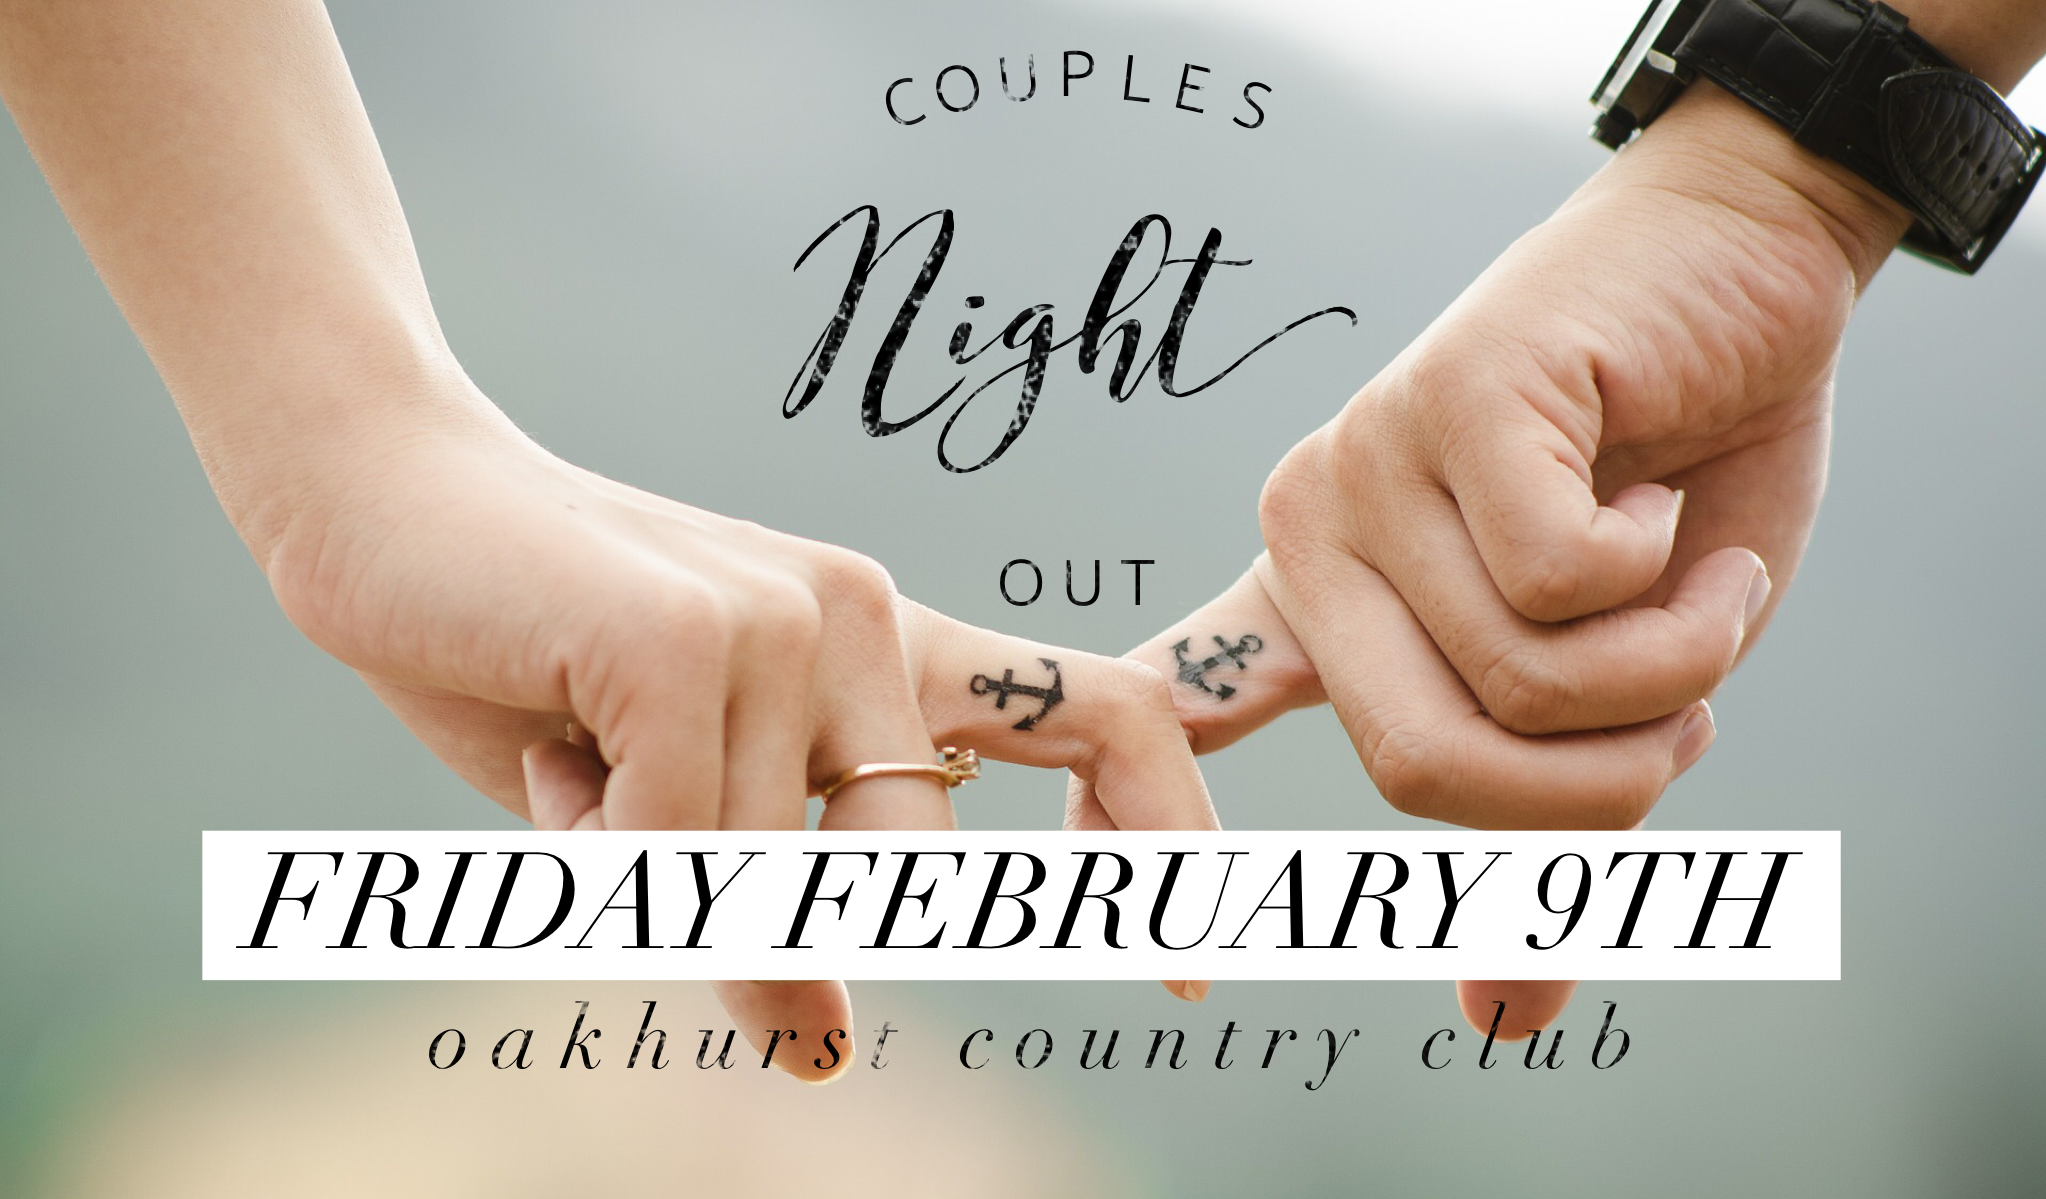 Couples Night Out Clayton Community Church